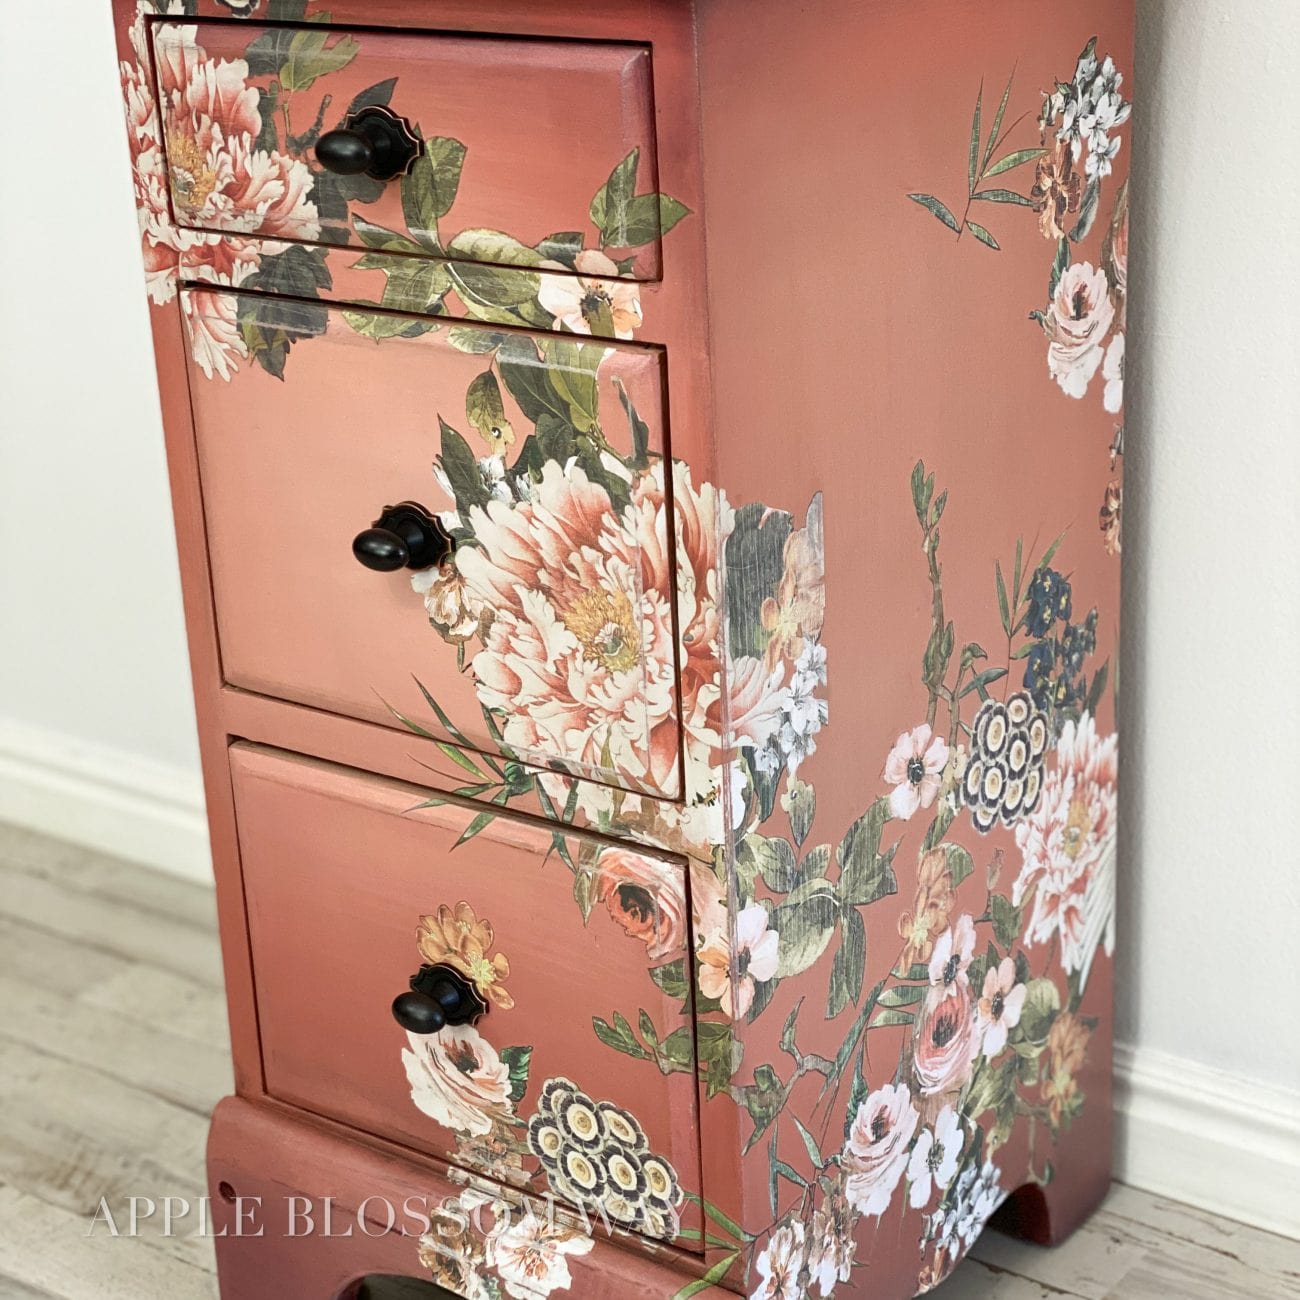 Pressed Flowers - Furniture Transfer - ReDesign with Prima